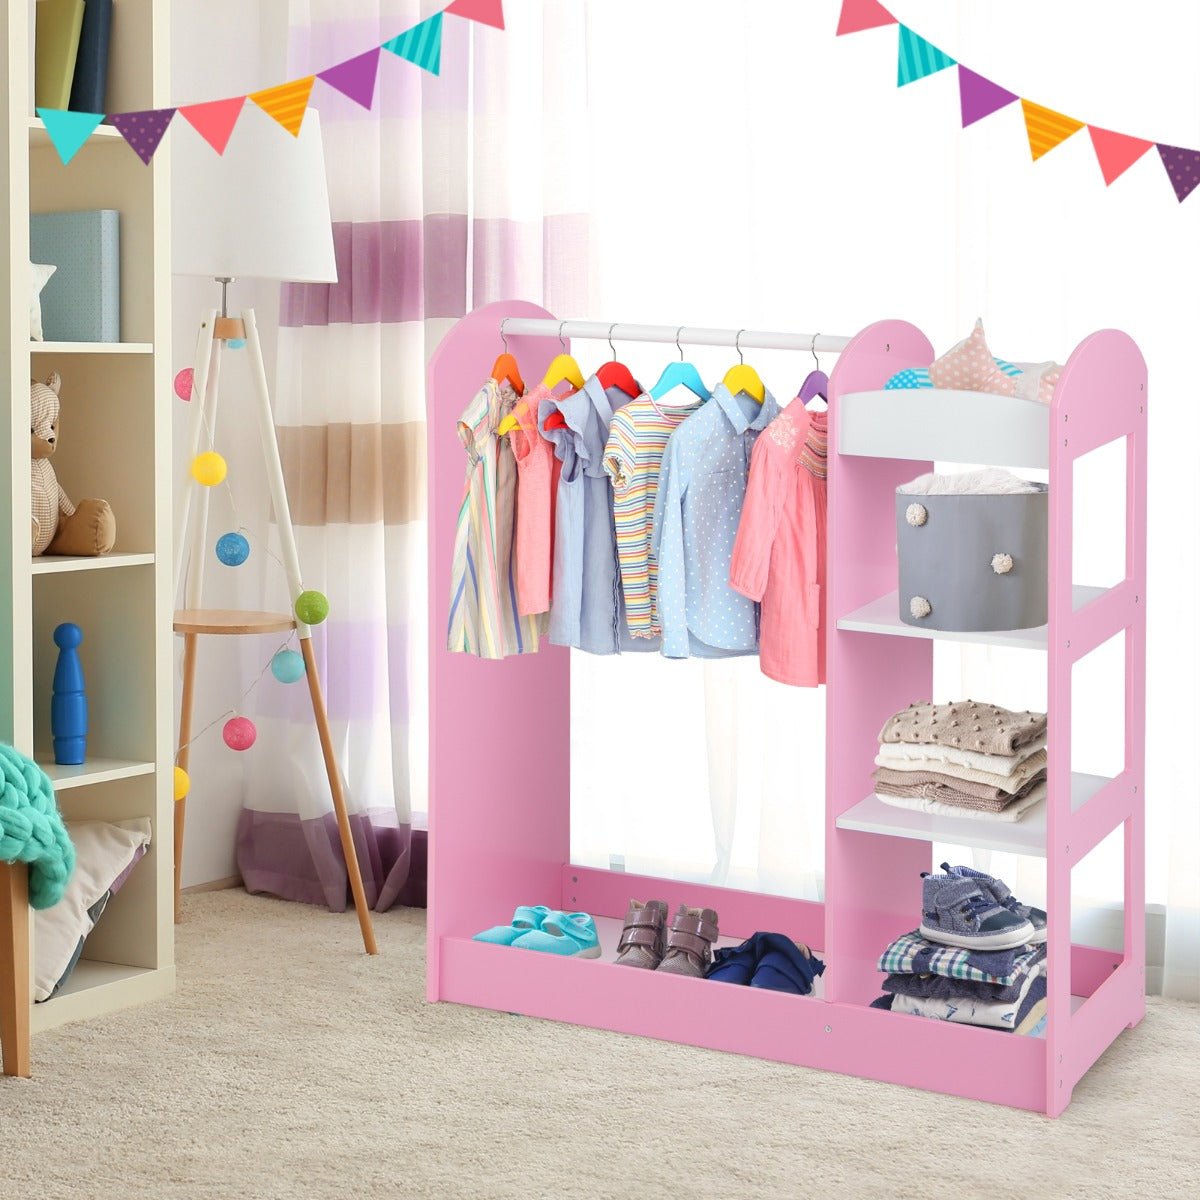 Enhance Playtime with Pink Kids Dress Up Storage - Shop Now!